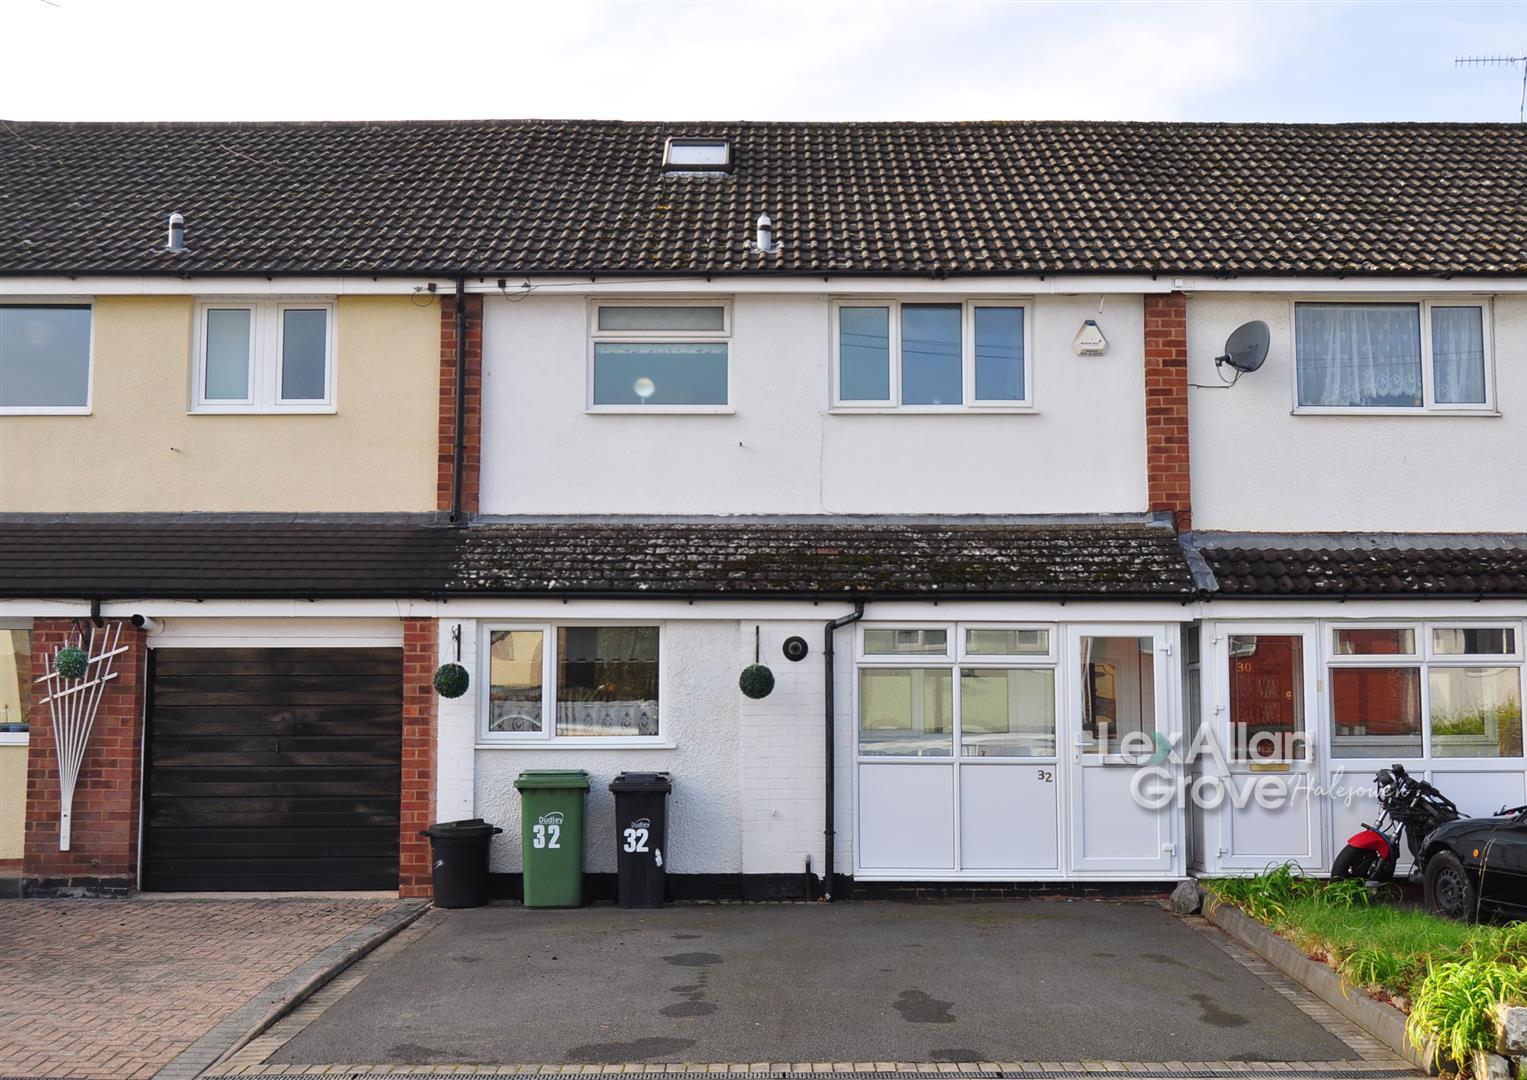 3 bed terraced house for sale in Woodman Close, Halesowen - Property Image 1